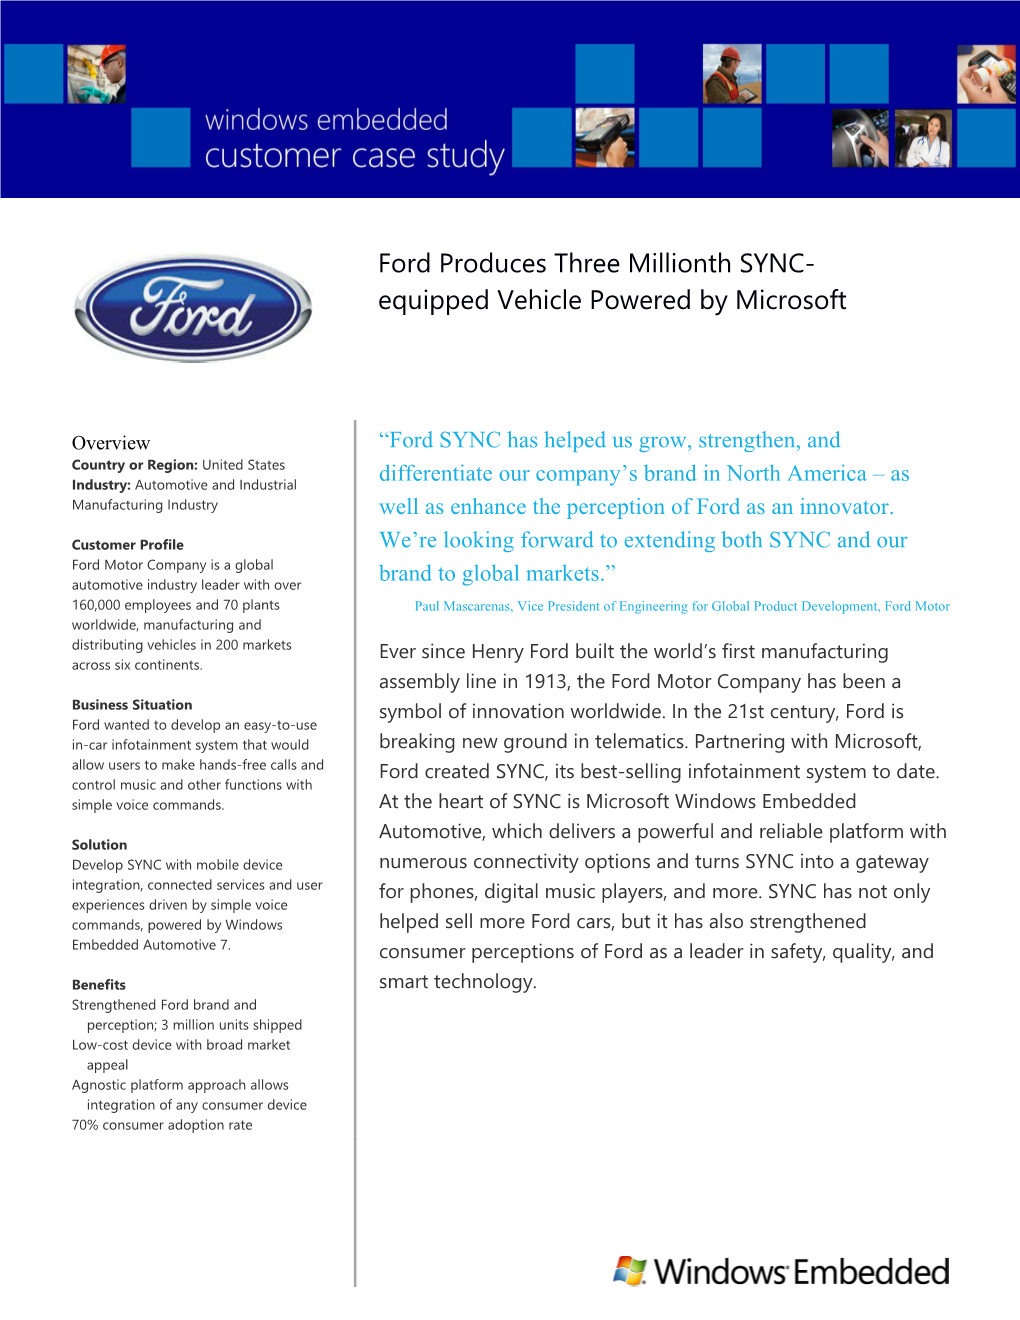 Ford Produces Three Millionth SYNC-Equipped Vehicle Powered by Microsoft